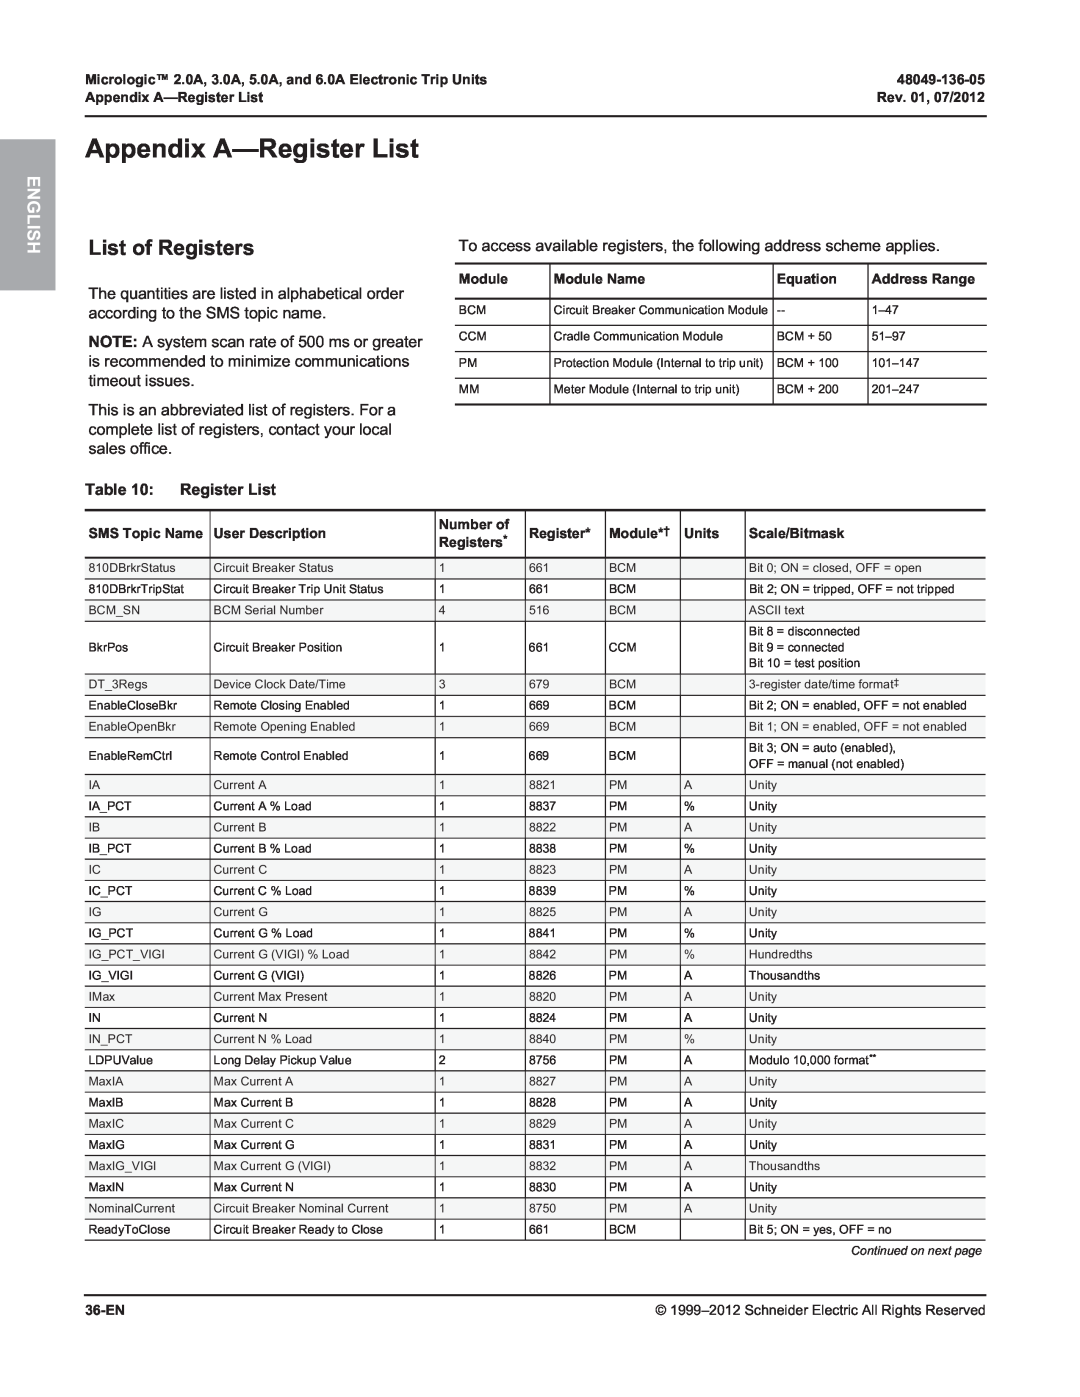 Schneider Electric and 6.0A, 3.0A, 2.0A, 5.0A manual Appendix A-Register List, List of Registers, English 